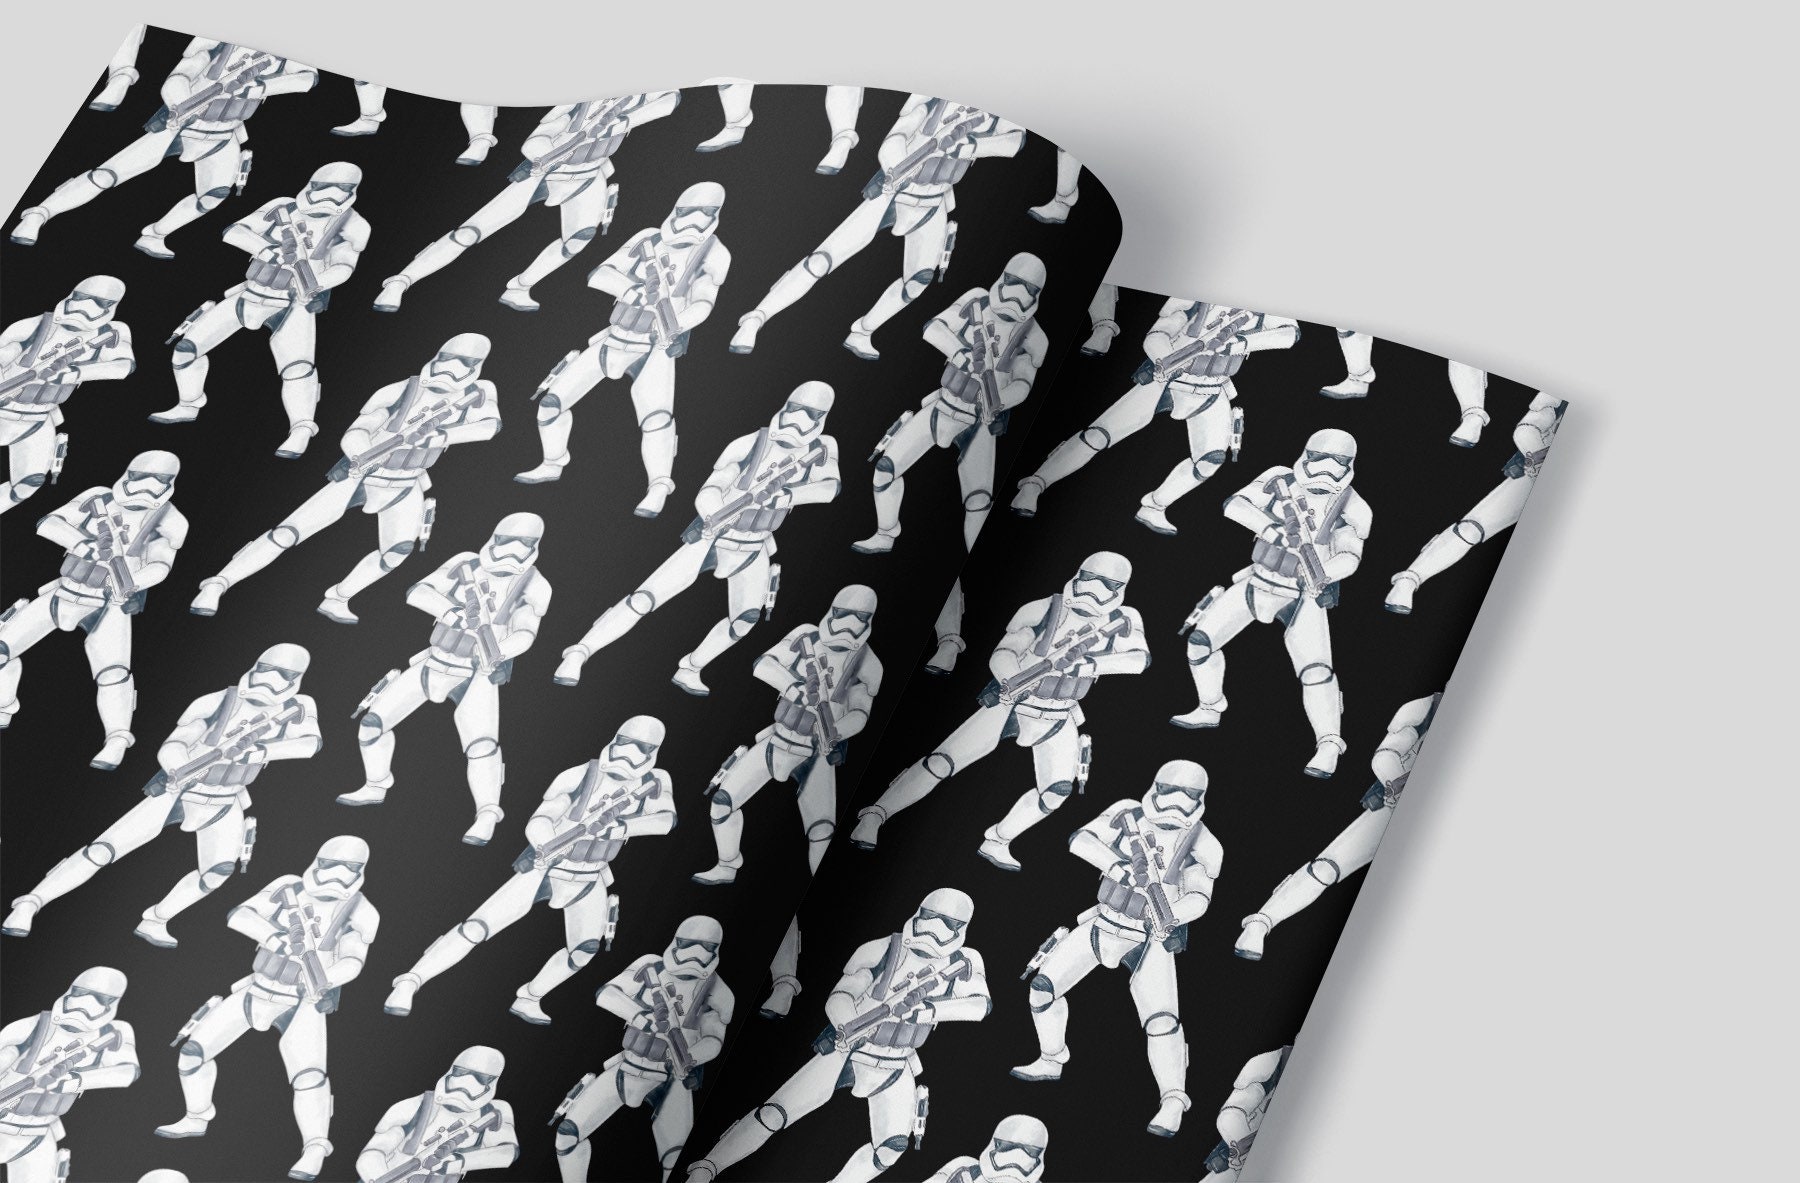 Stormtrooper Wars Wrapping Paper